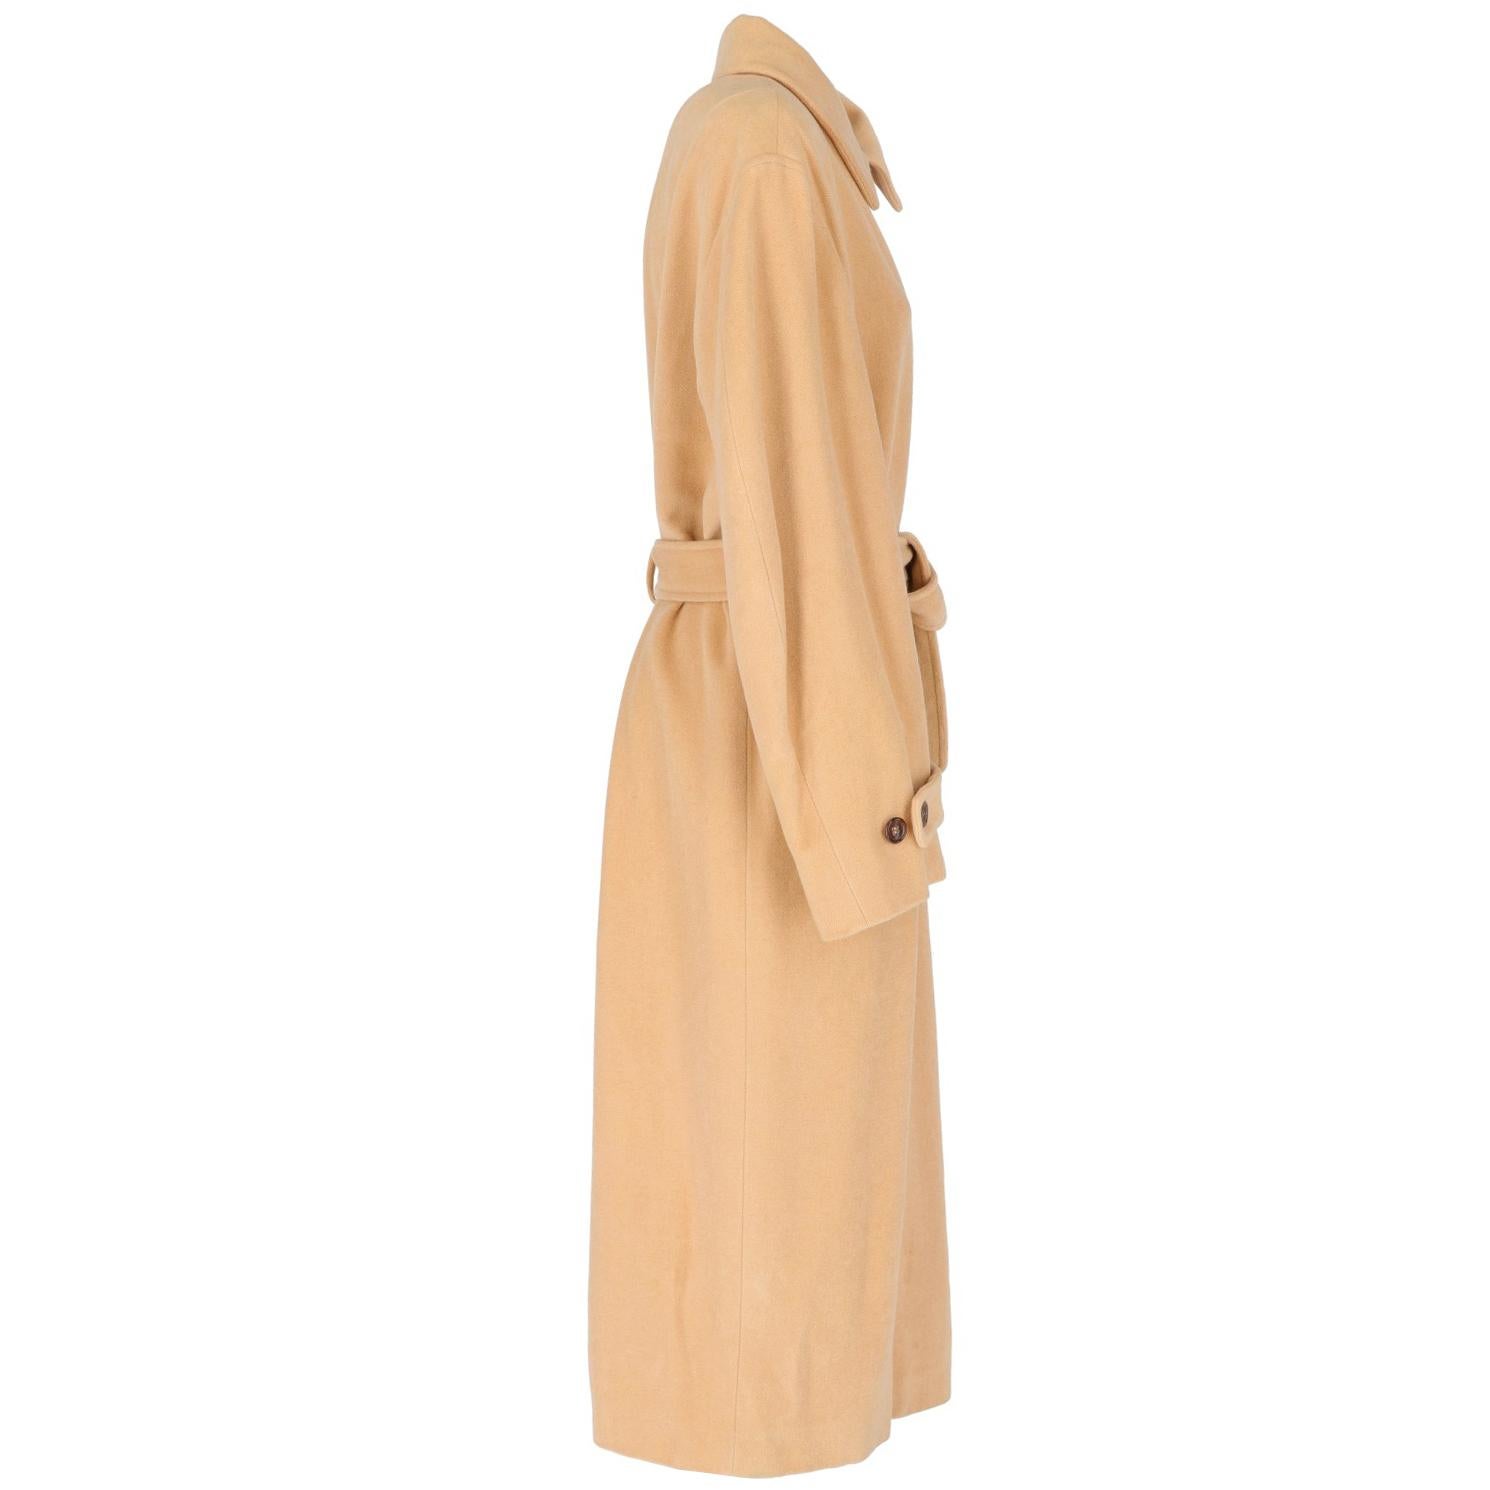 The Jil Sander long beige wool coat features a classic collar, a fly front closing, a waist belt with covered brown leather buckle, a thread chest pocket and two side pockets, an adjustable cuffs througth buttons and a 53 cm back slit. Lined.

A